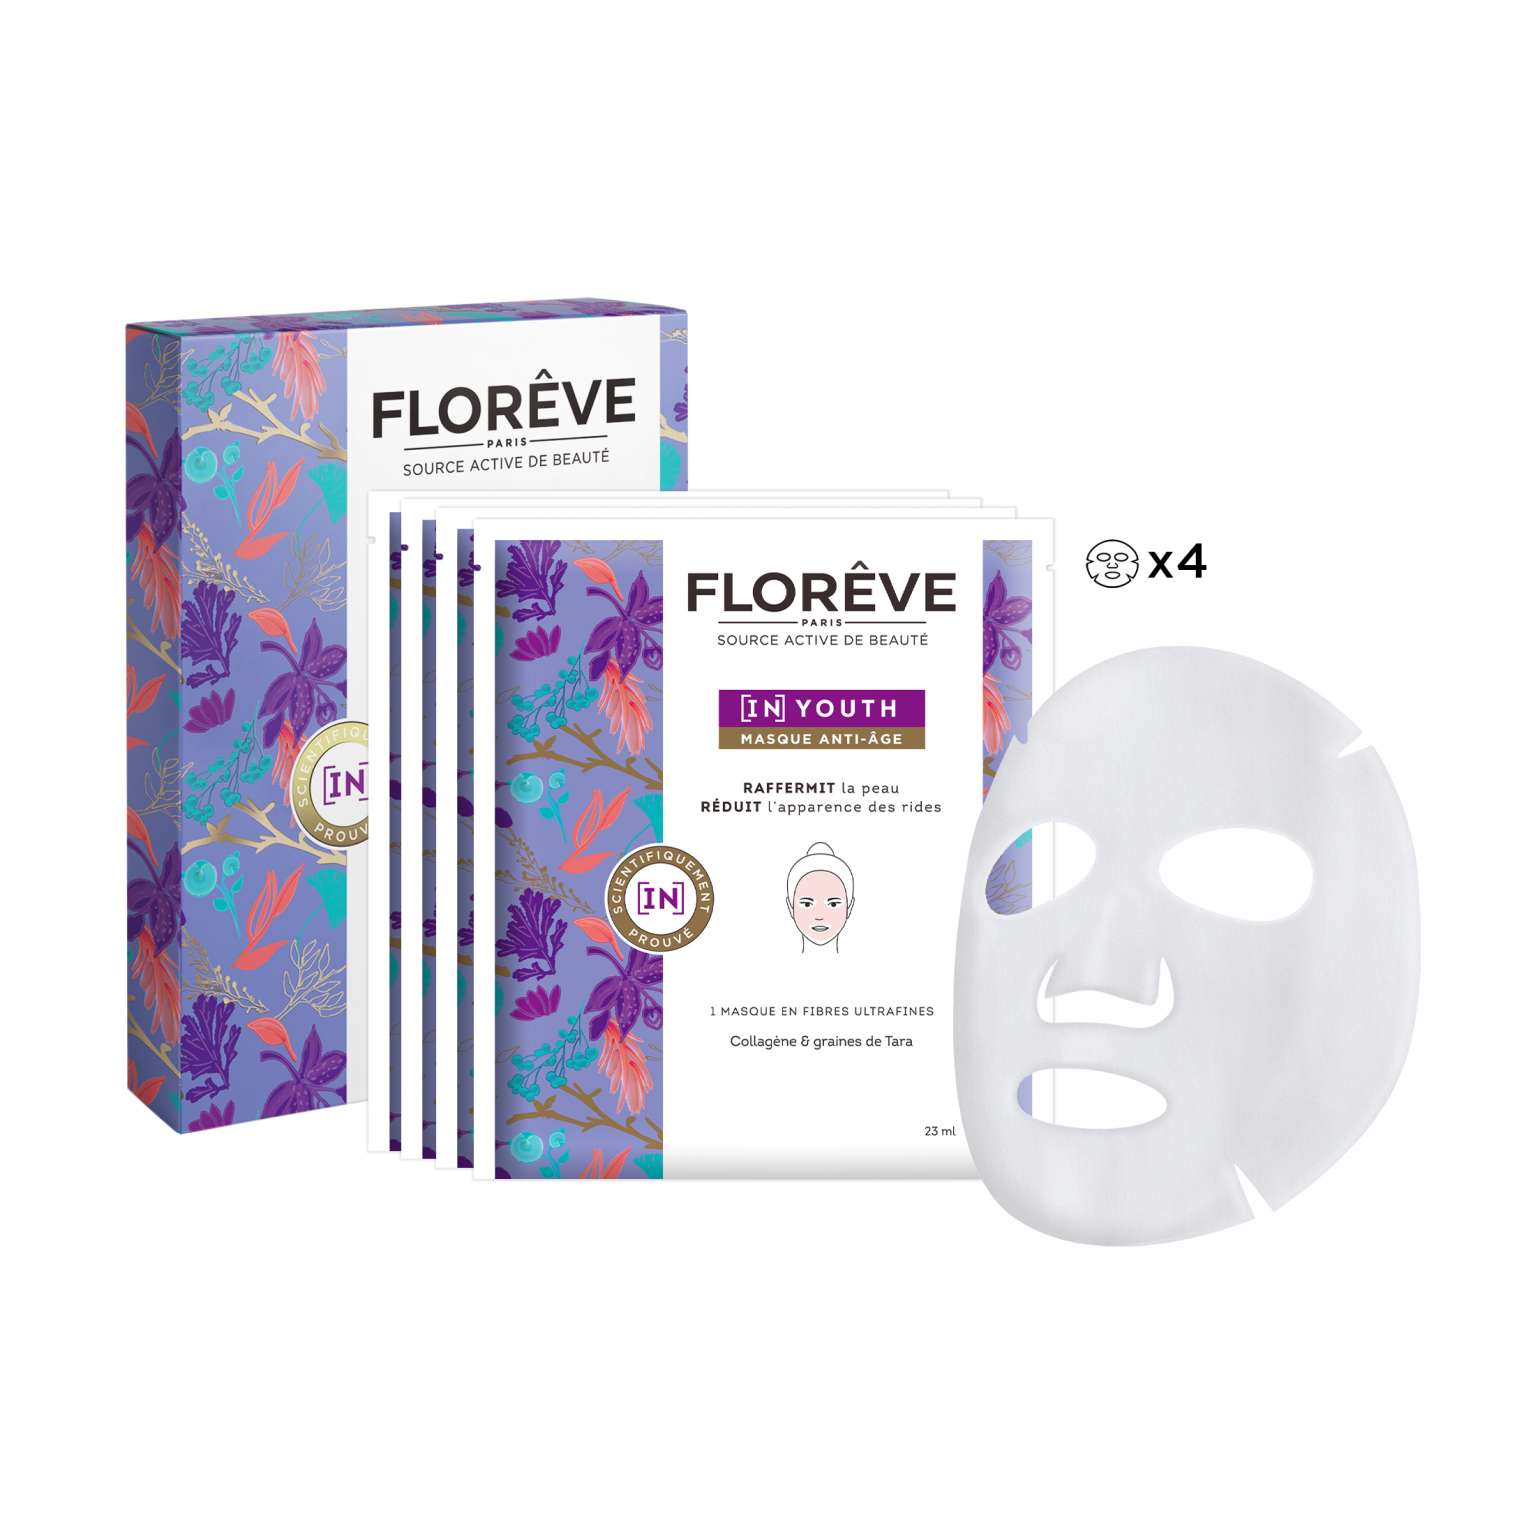 4 [IN] YOUTH Anti-Aging Masks 